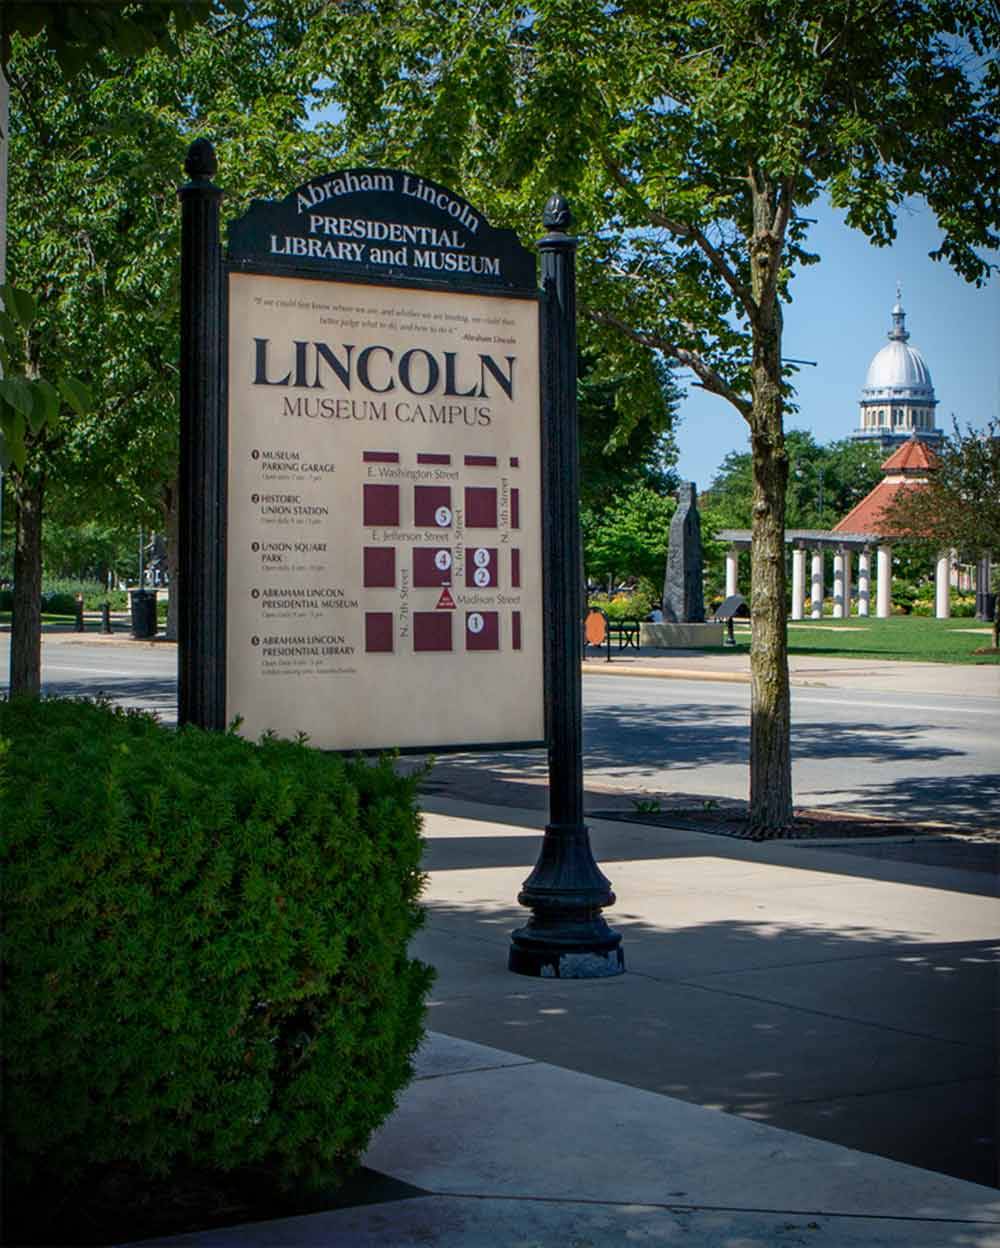 Map of Abraham Lincoln Presidential Library and Museum Campus